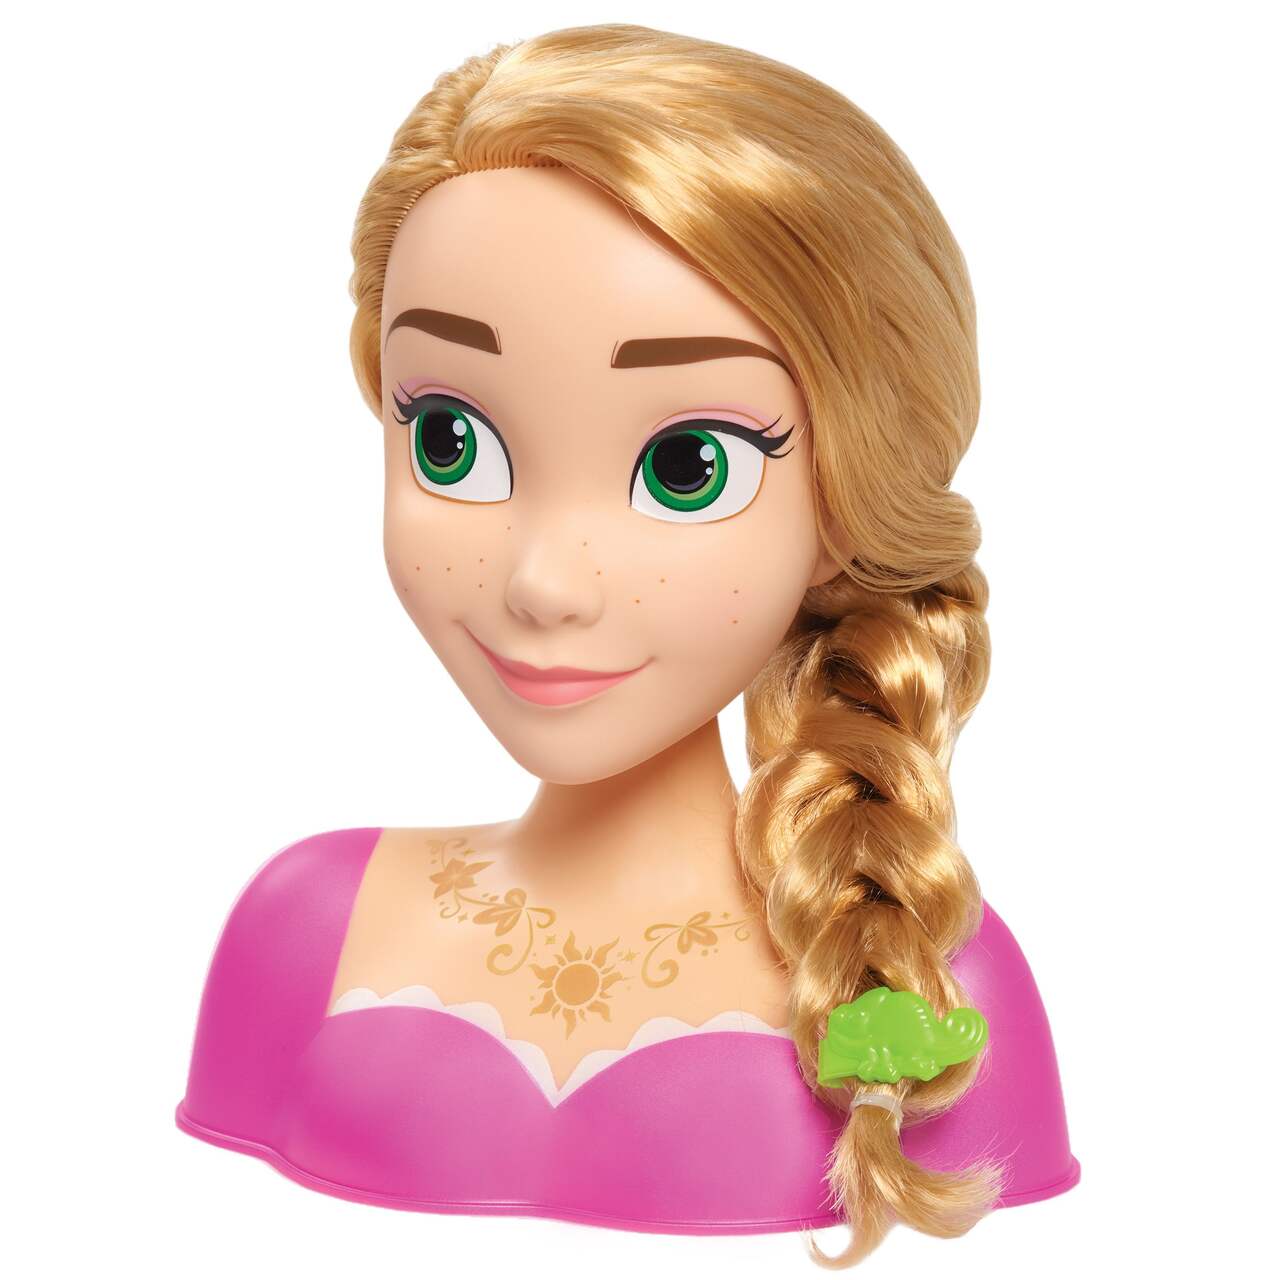 Disney Princess Deluxe Hair Styling Head Toy w/14 pcs of Accessories,  Assorted, Ages 3+